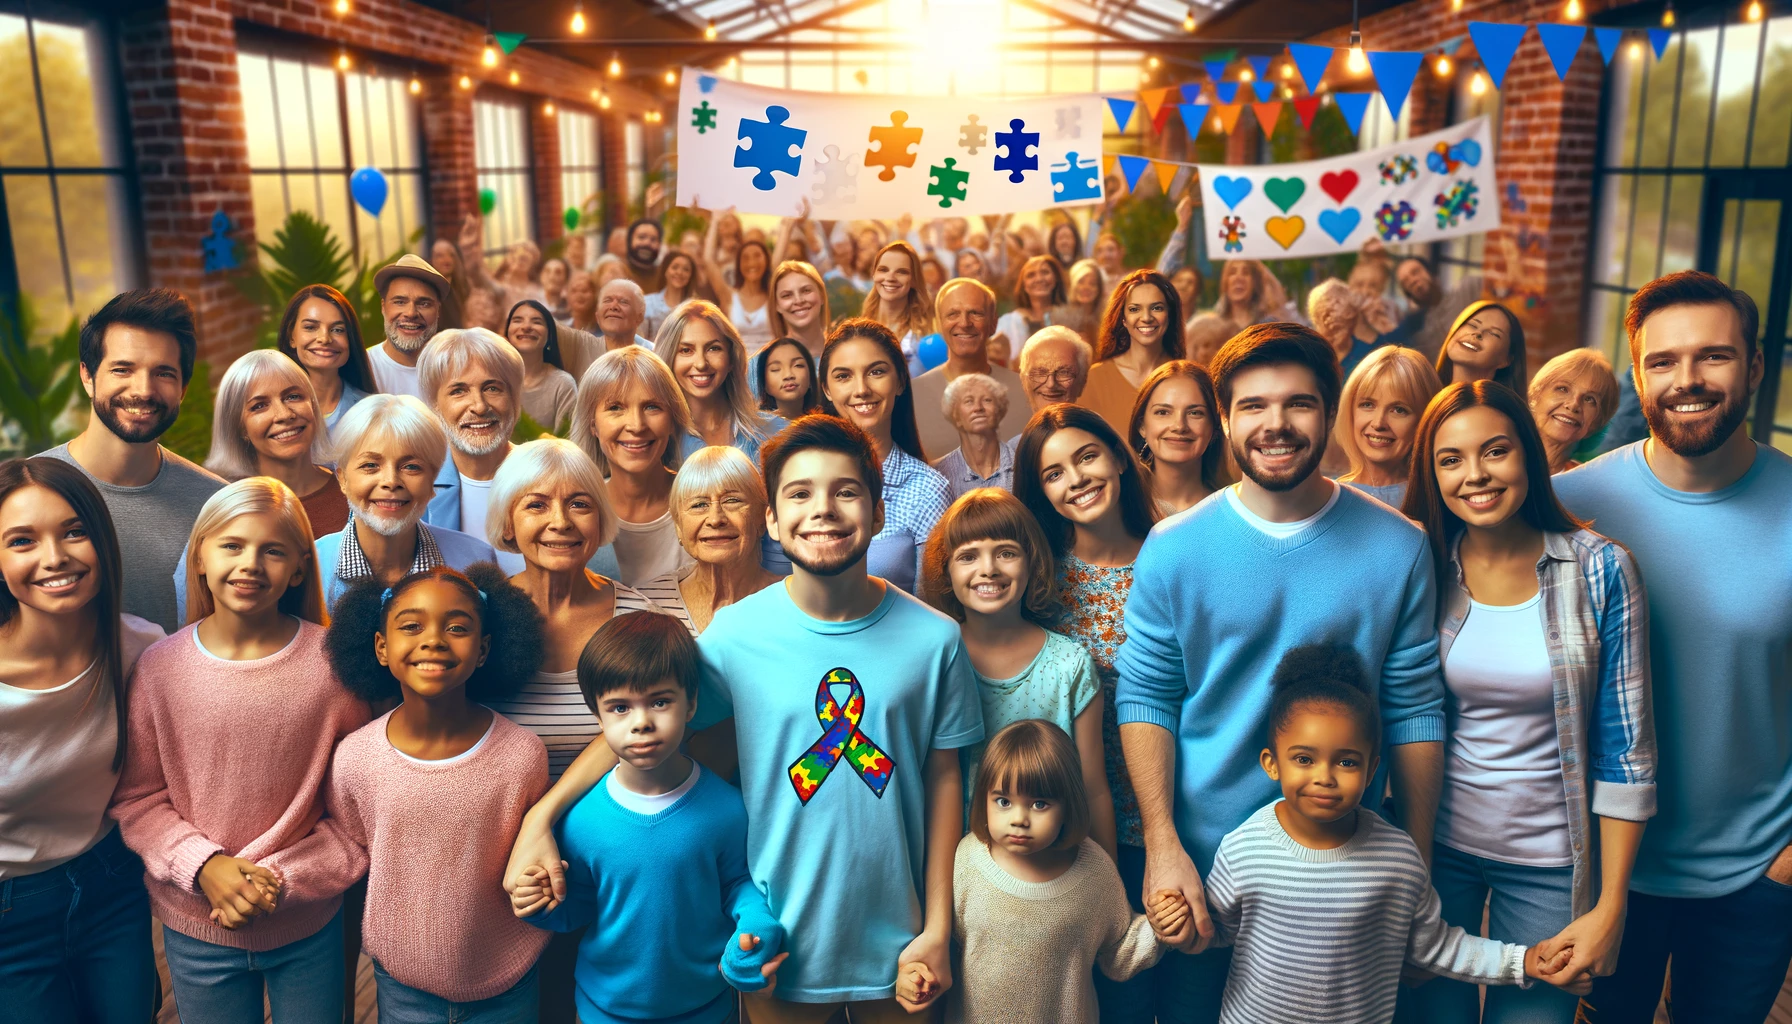 Embracing neurodiversity -A photo of diverse individuals and families coming together in a community setting, visibly showcasing symbols of autism awareness